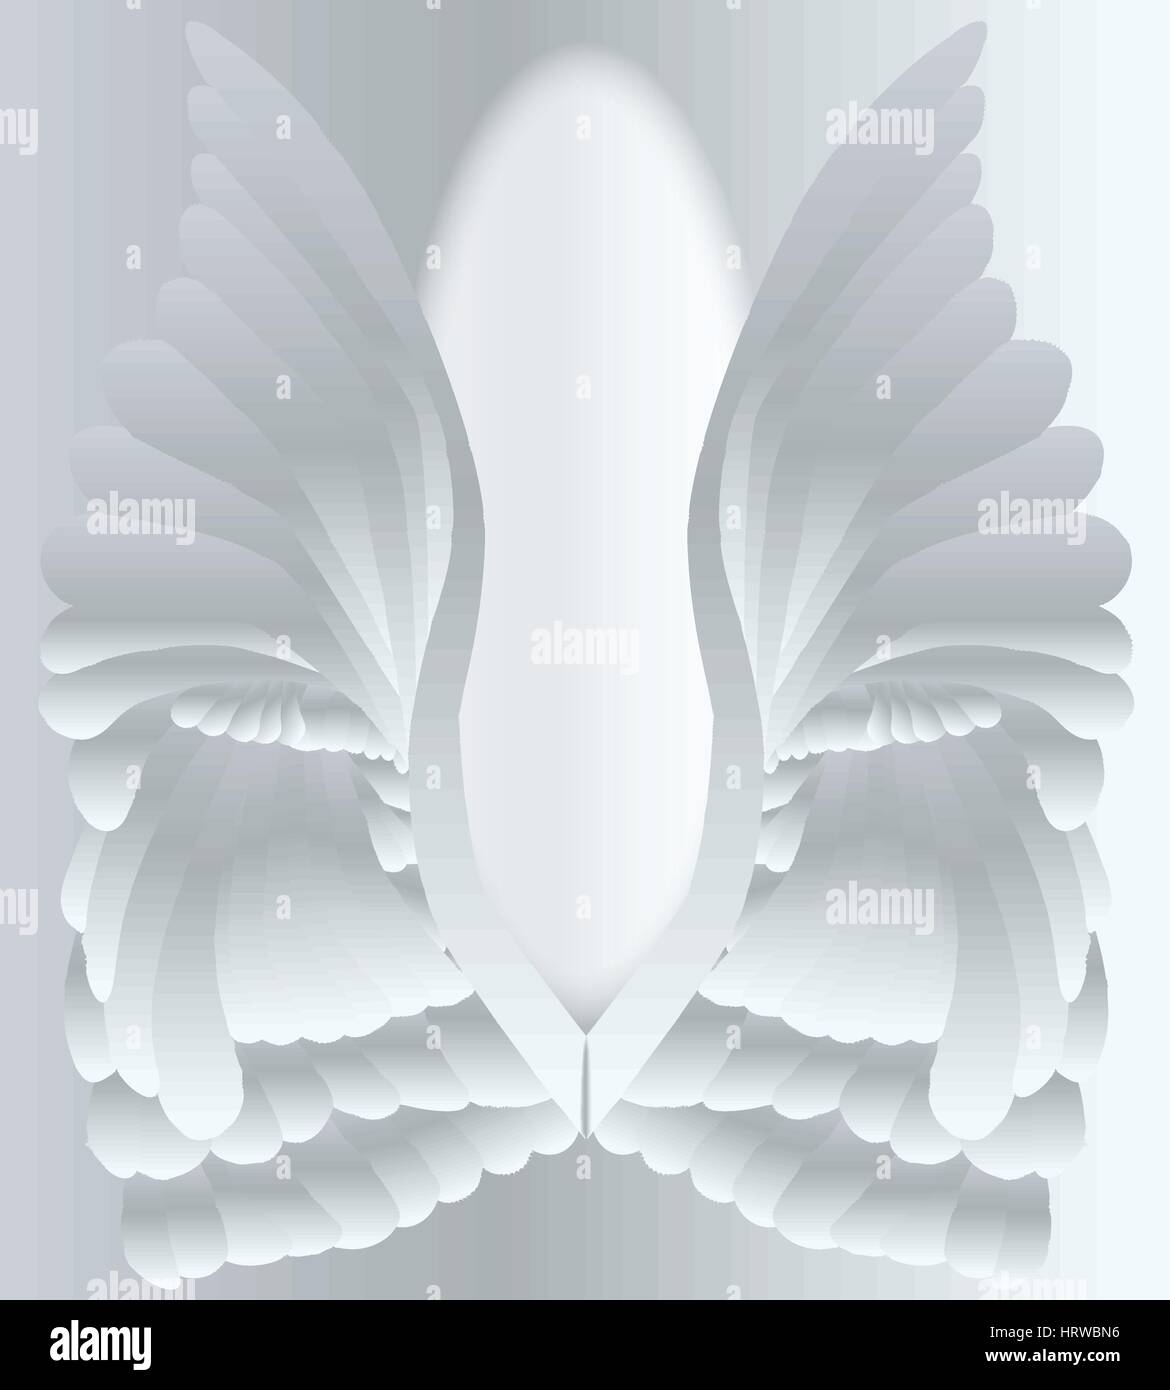 A large pair of silver angelic style wings. Stock Vector